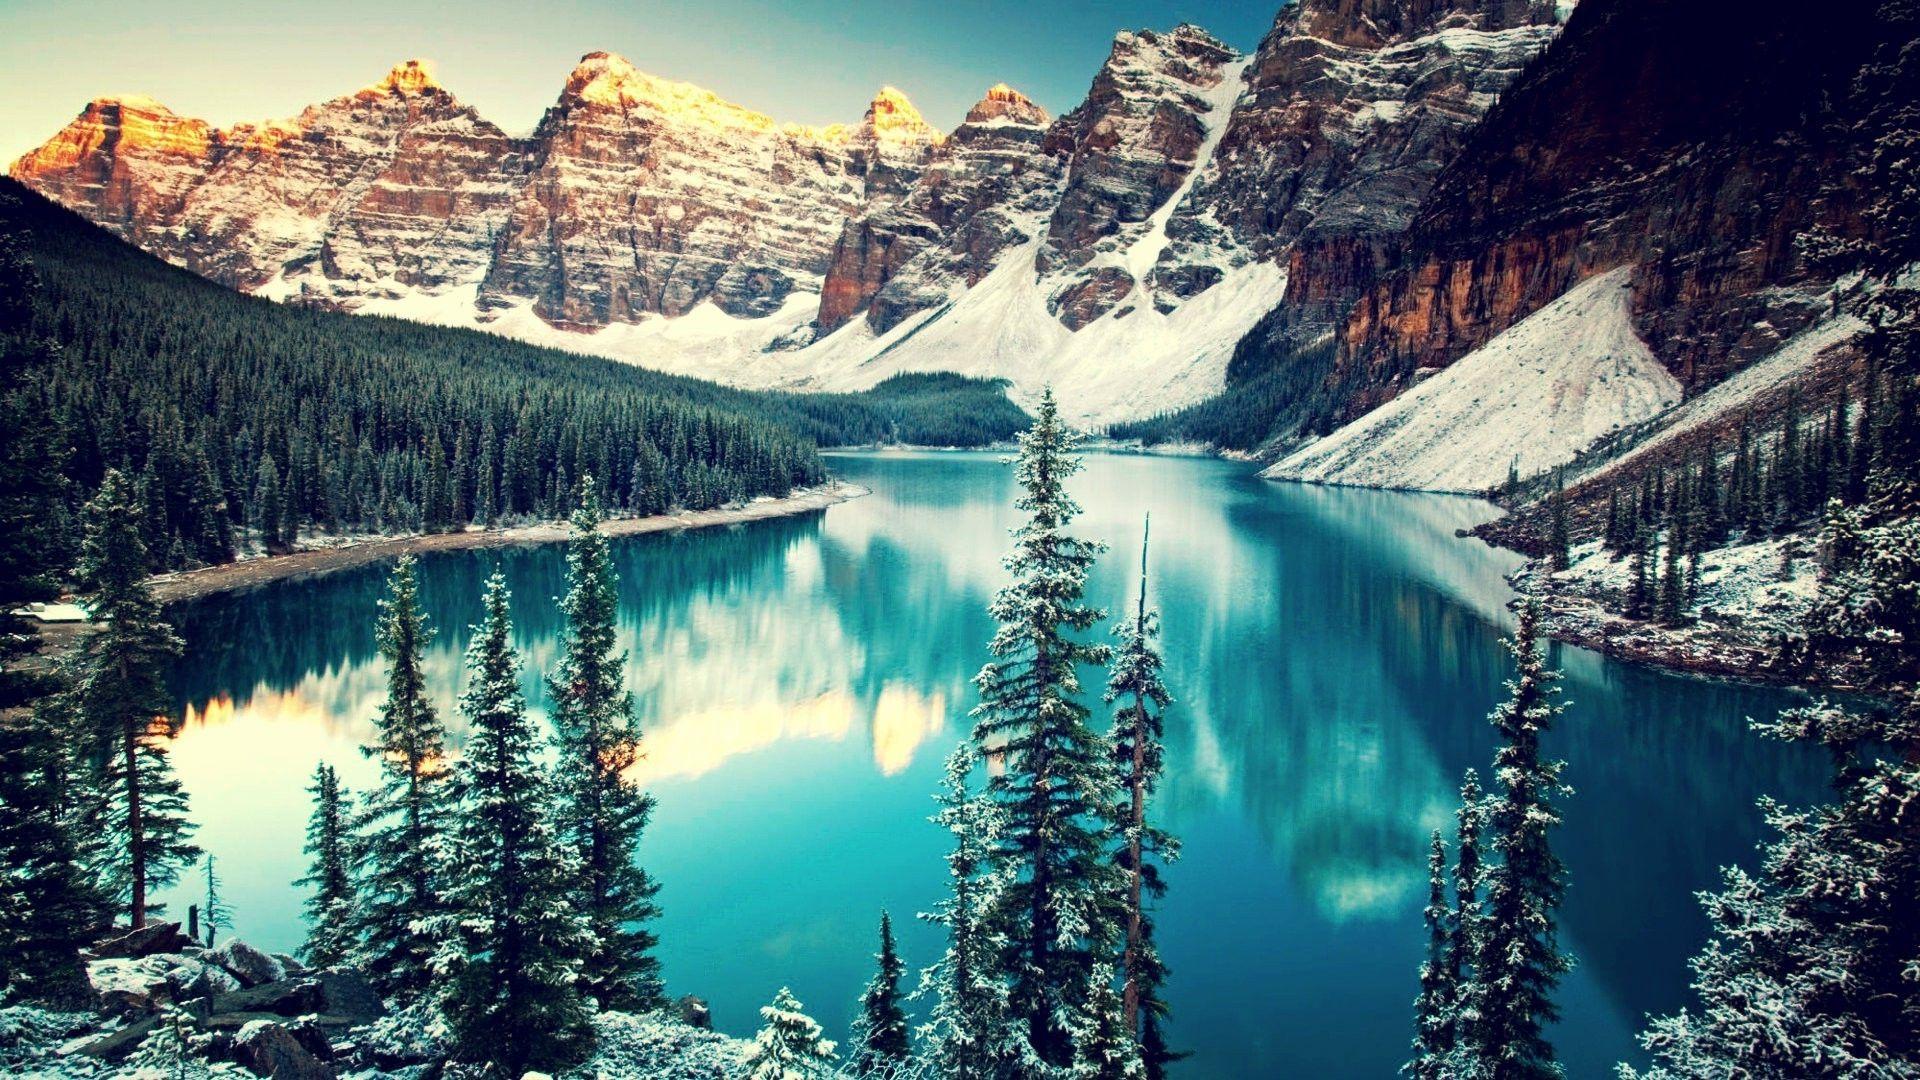 Mountain, Trees, Snow, Water, Moraine Lake, Canada, Lake, Forest